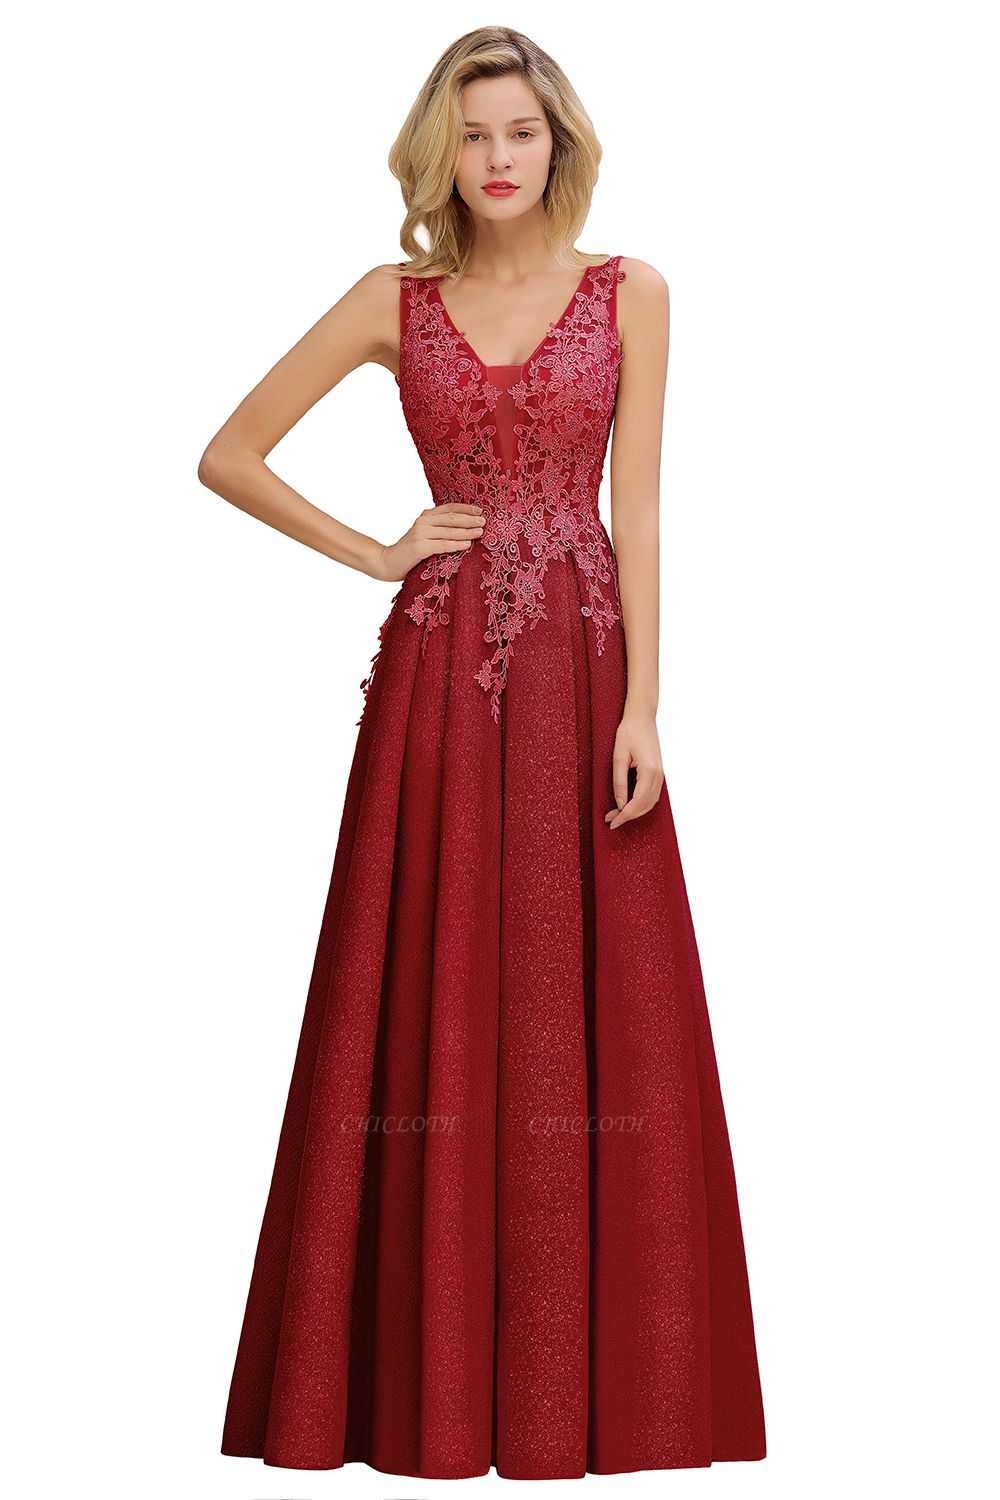 Chicloth Attractive V-neck Lace A-line Evening Dress